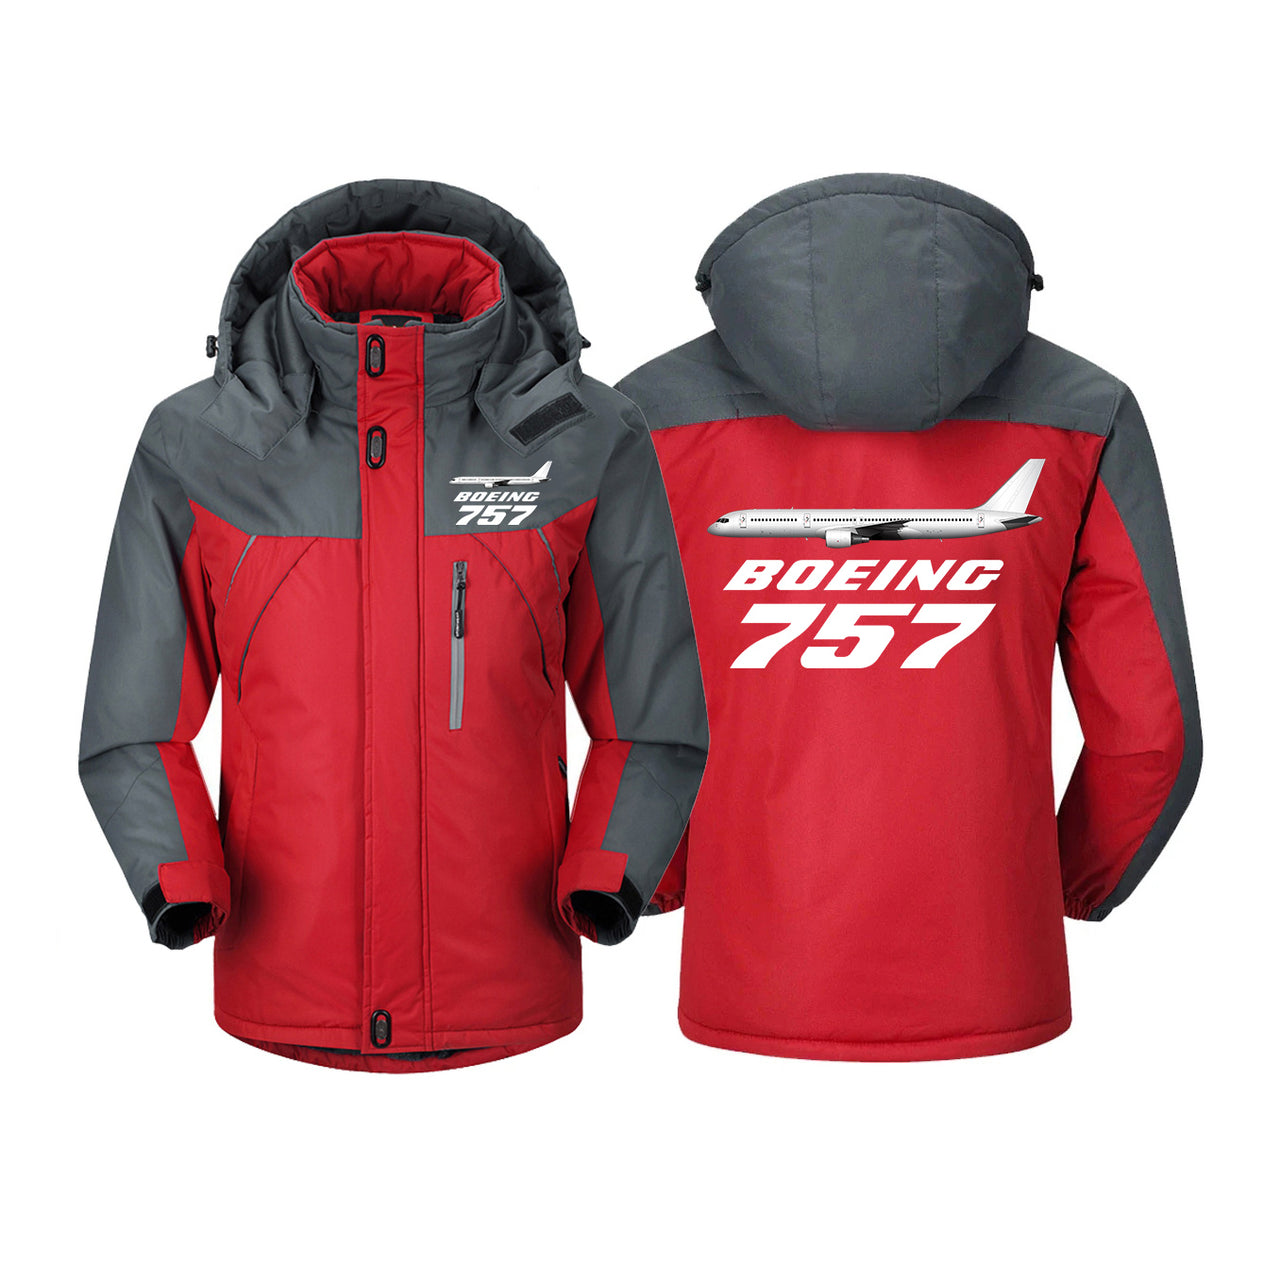 The Boeing 757 Designed Thick Winter Jackets